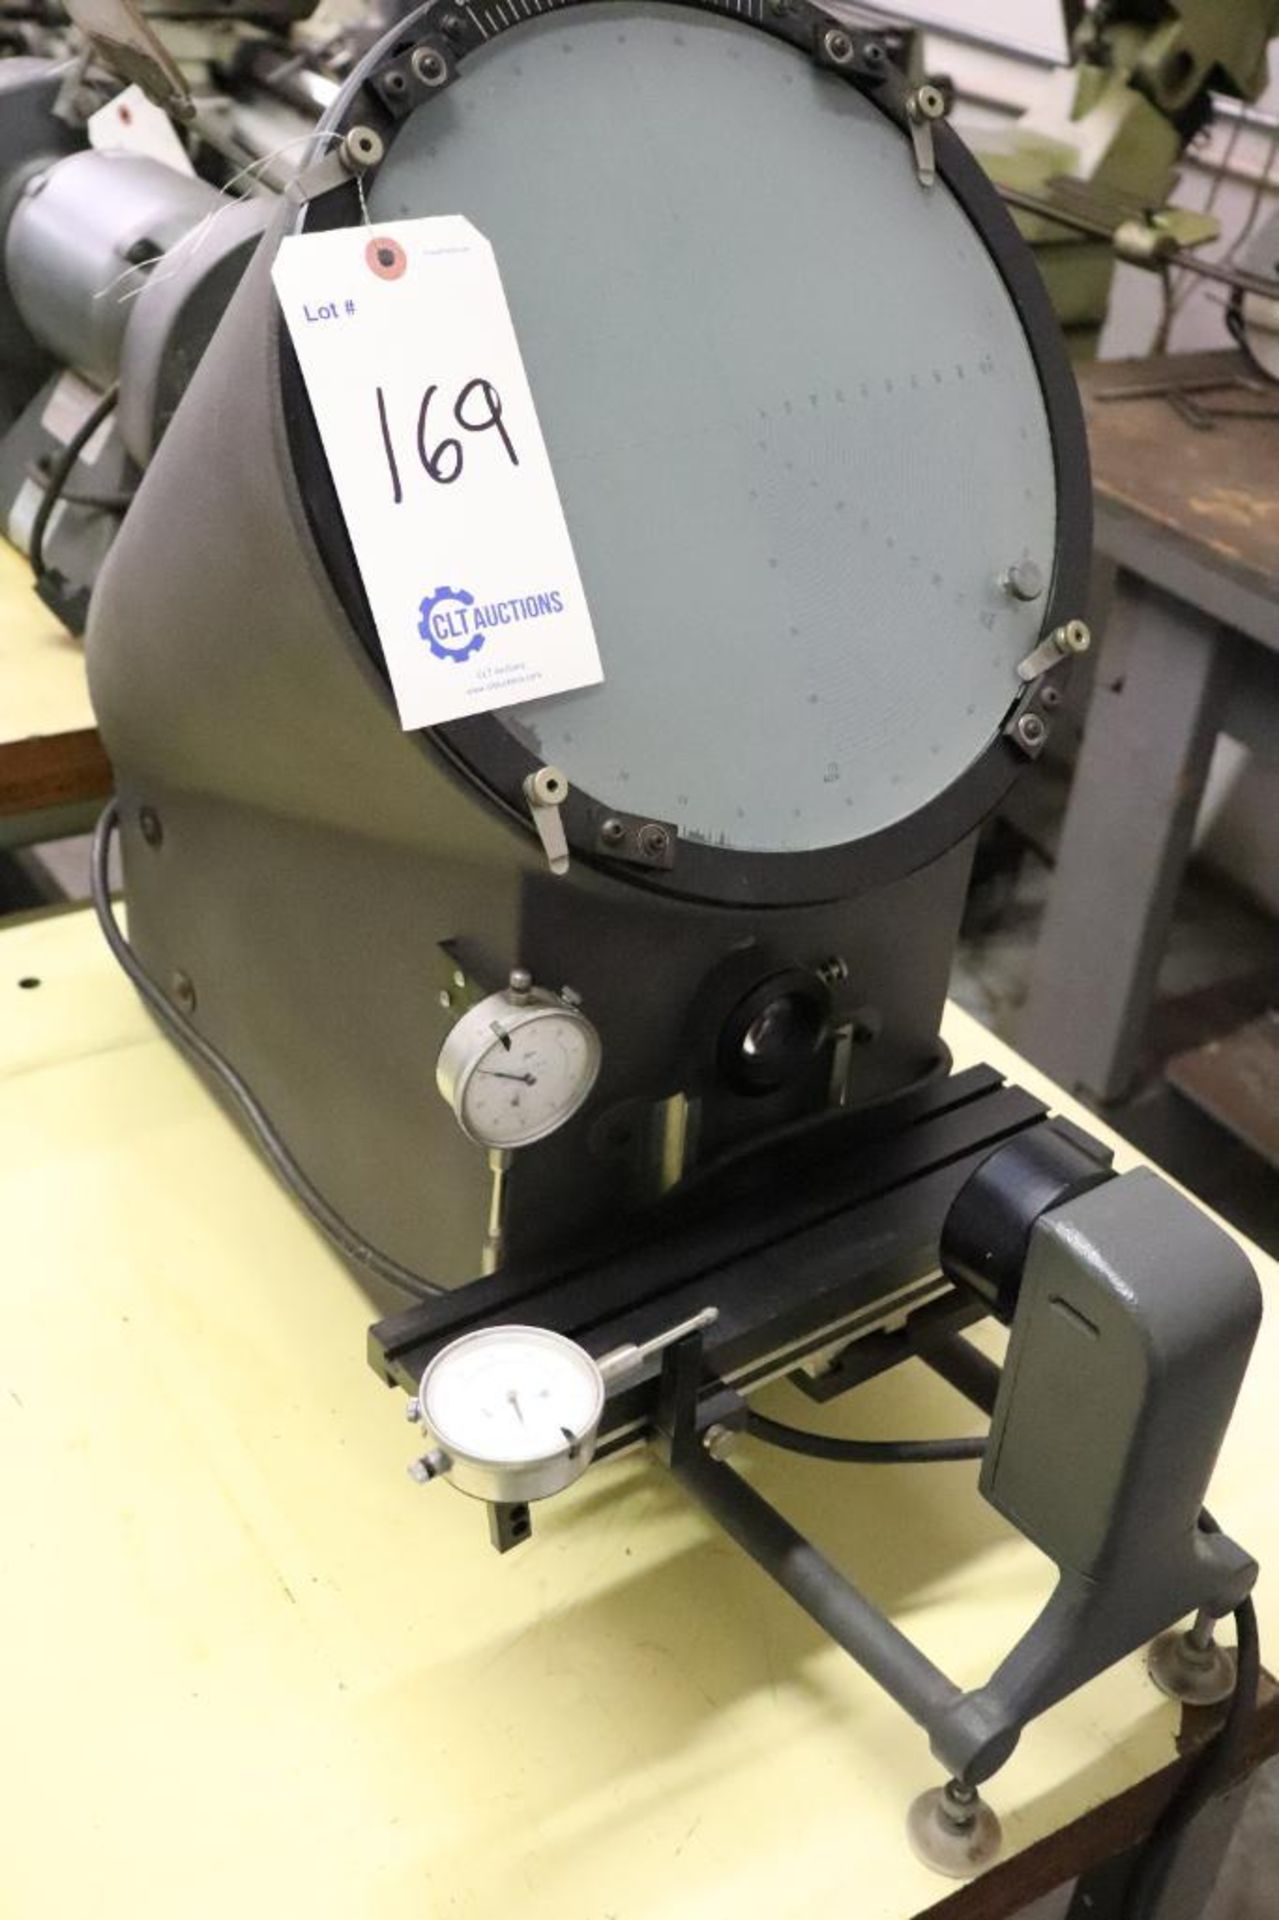 Bench top optical comparator with Enco dial indicators